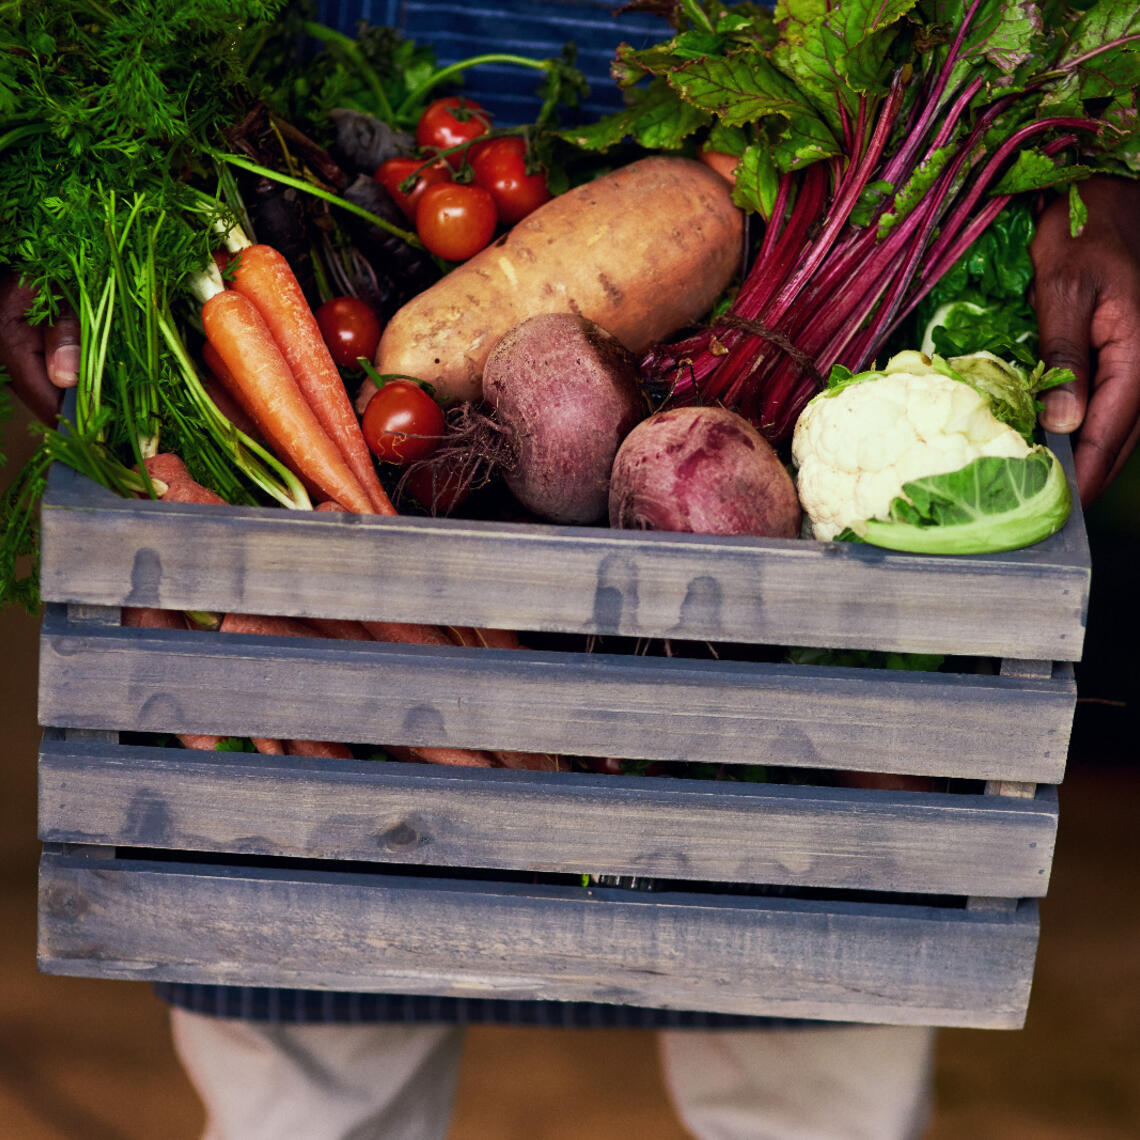 A basket of fresh vegetables including carrots, beets, potatos, cauliflower and tomatos carried by a person